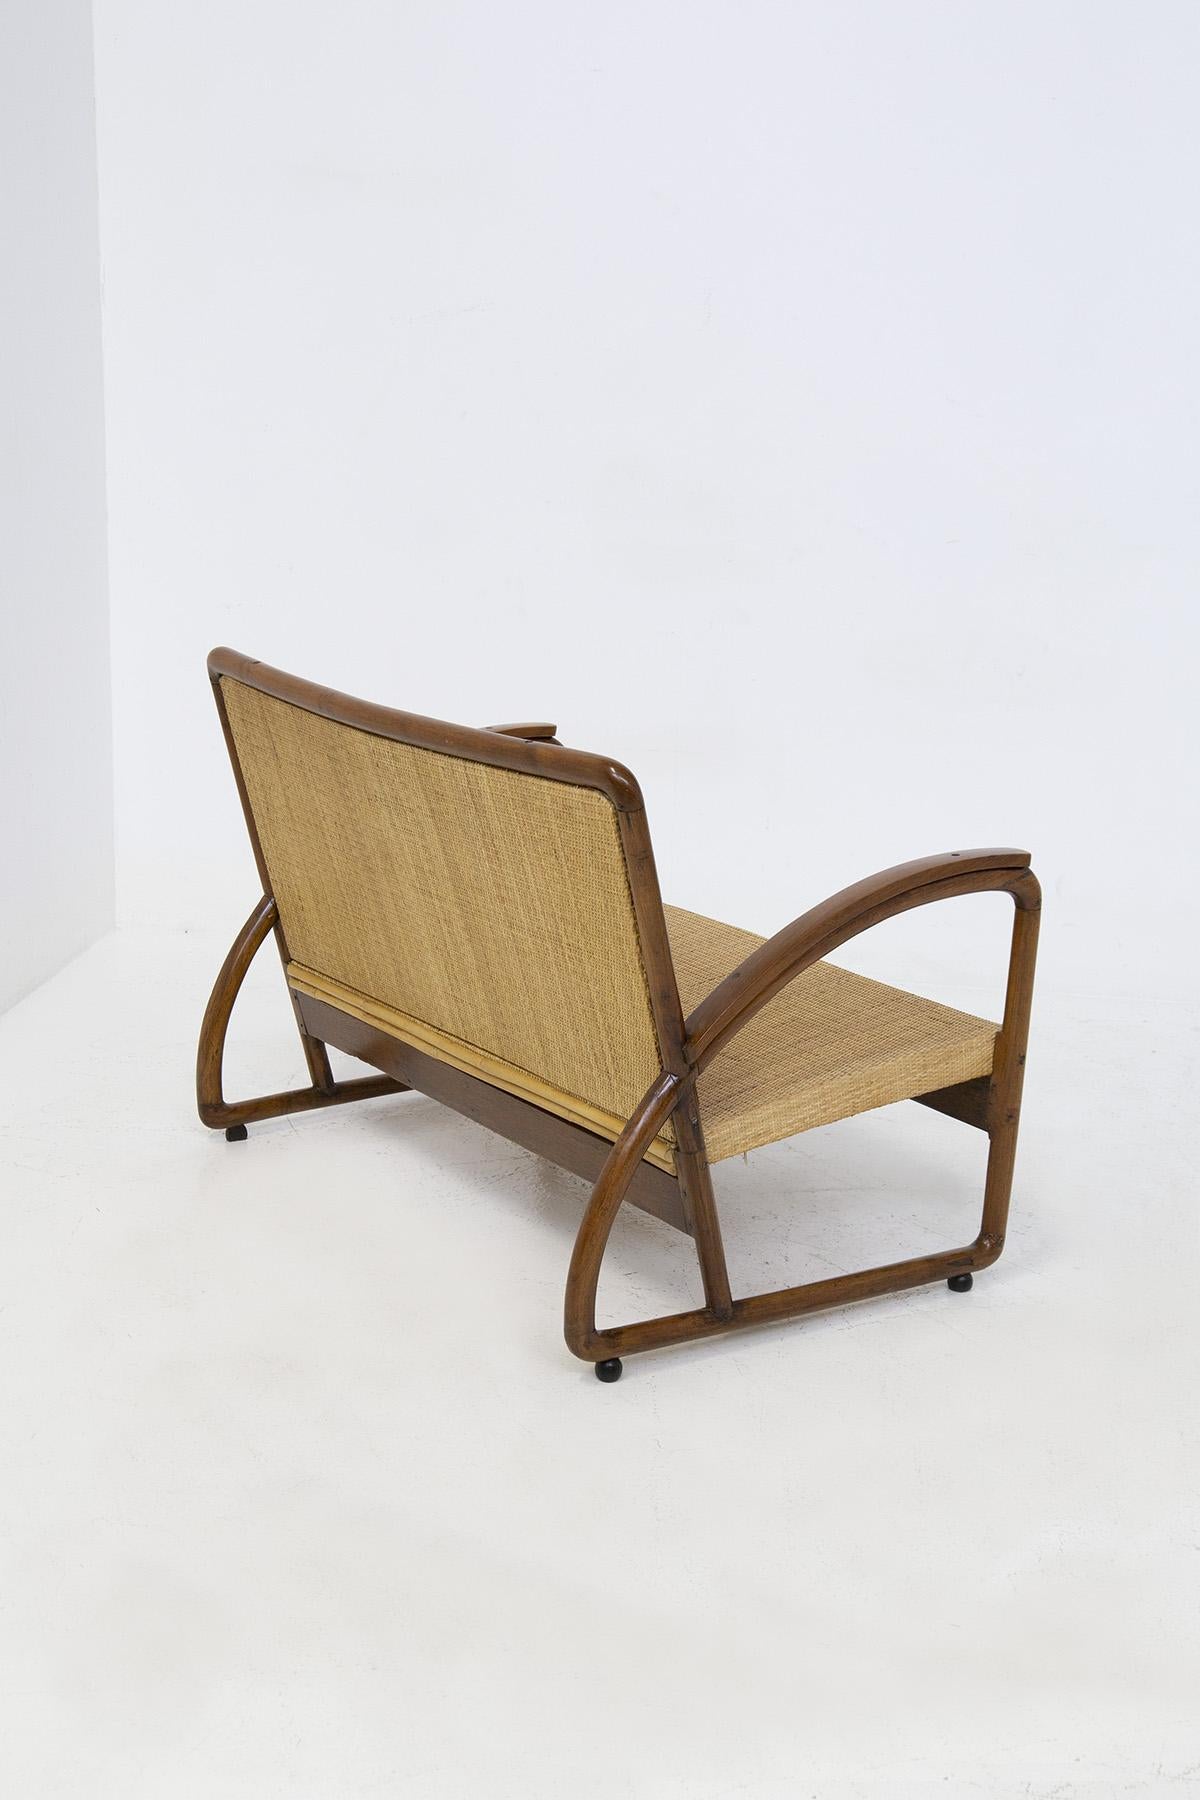 Italian Rationalist Loveseat in Wood and Rattan For Sale 8